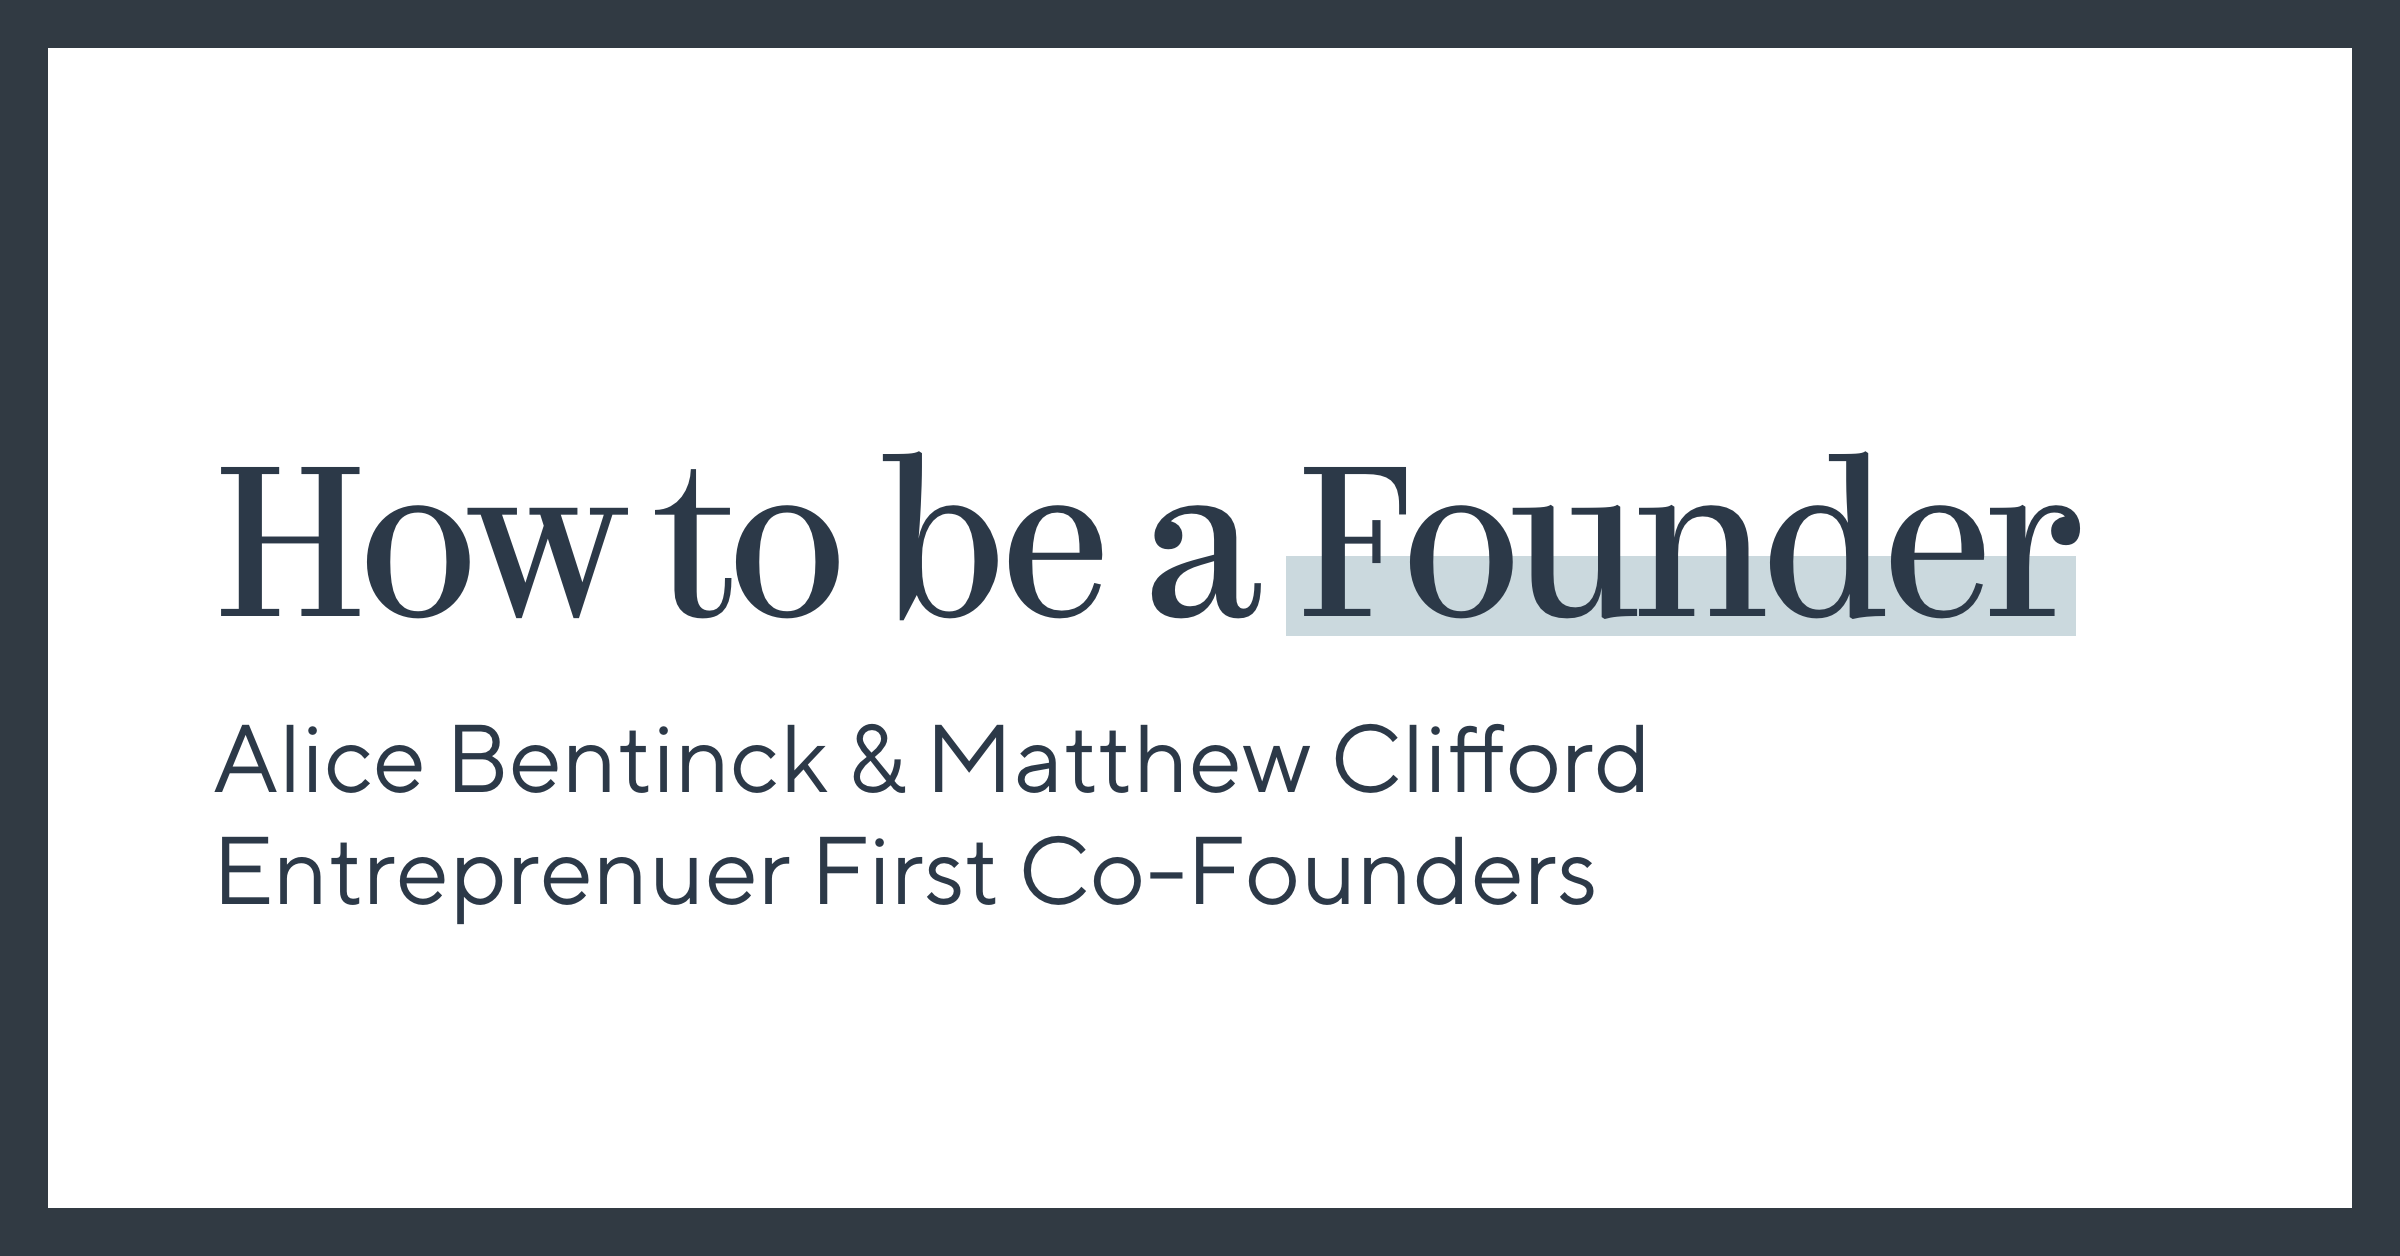 How to be a Founder